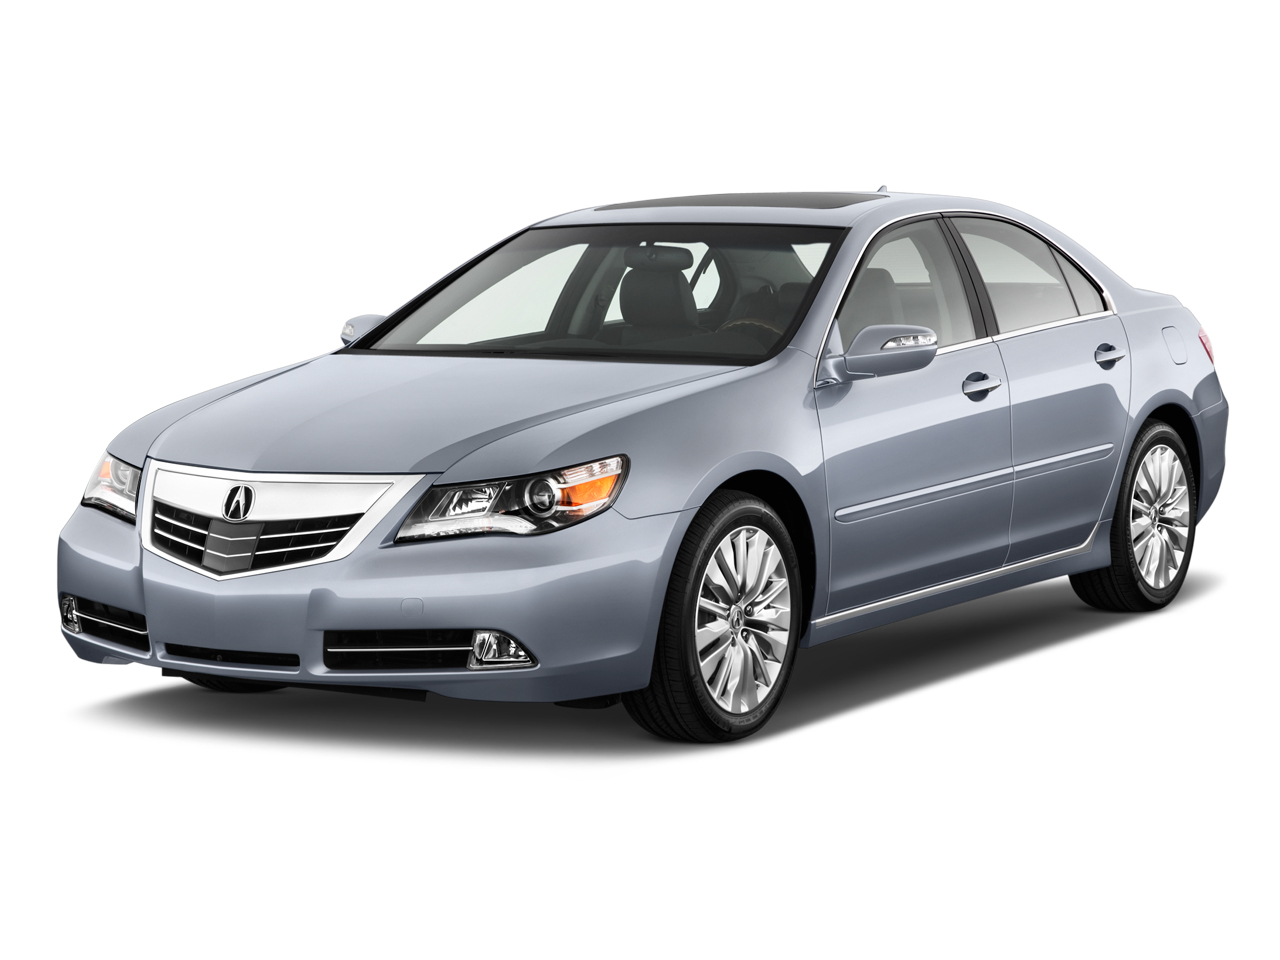 2012 Acura Rl Review Ratings Specs Prices And Photos The Car Connection